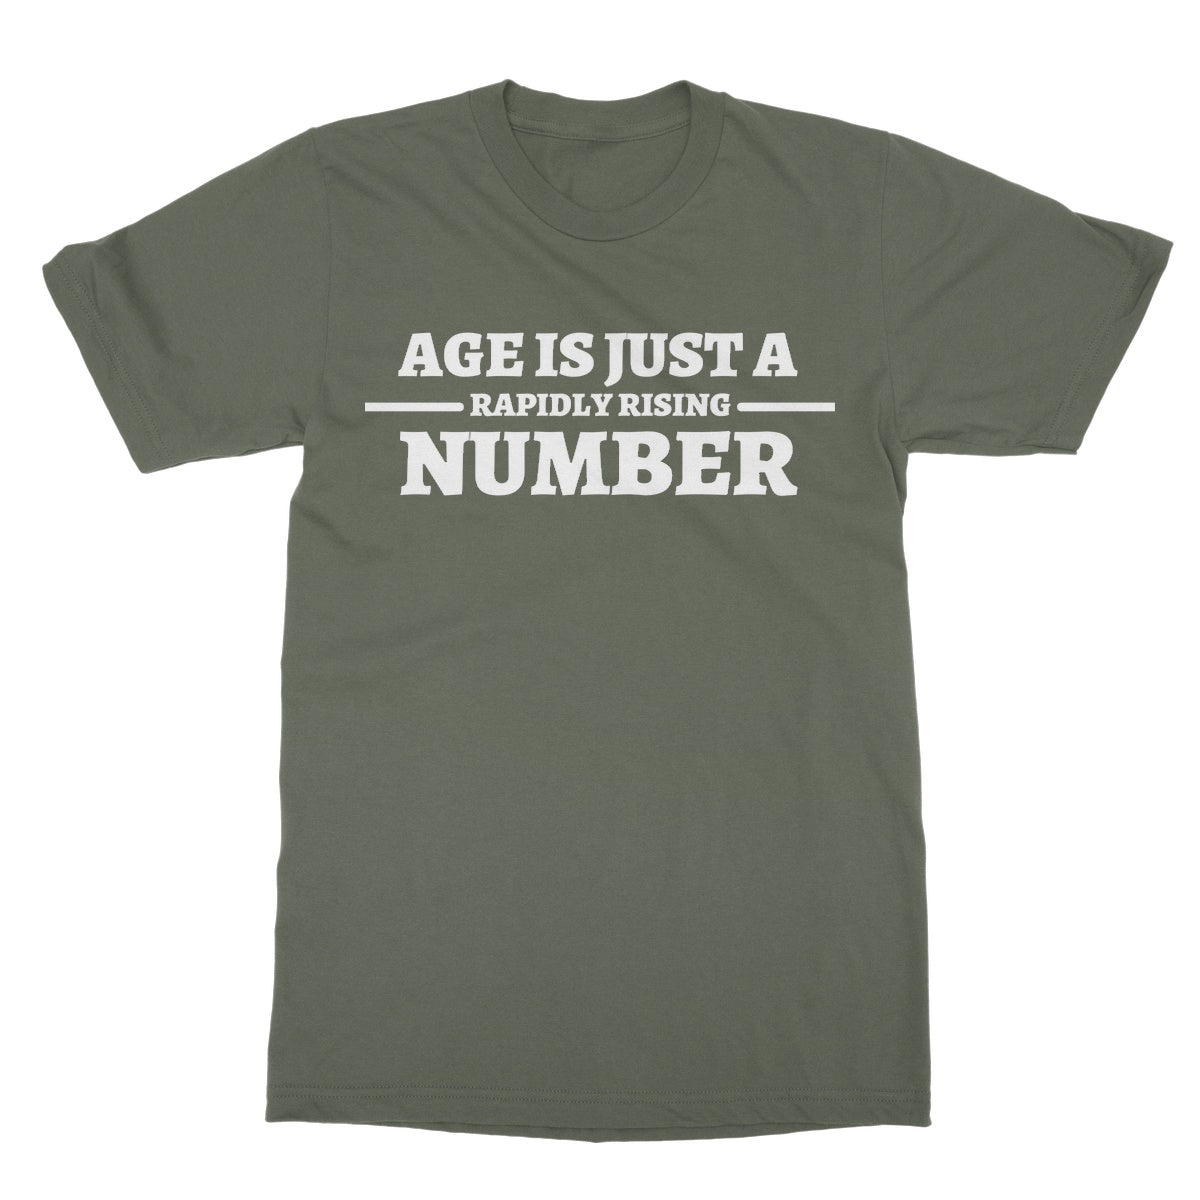 age is just a number t shirt green